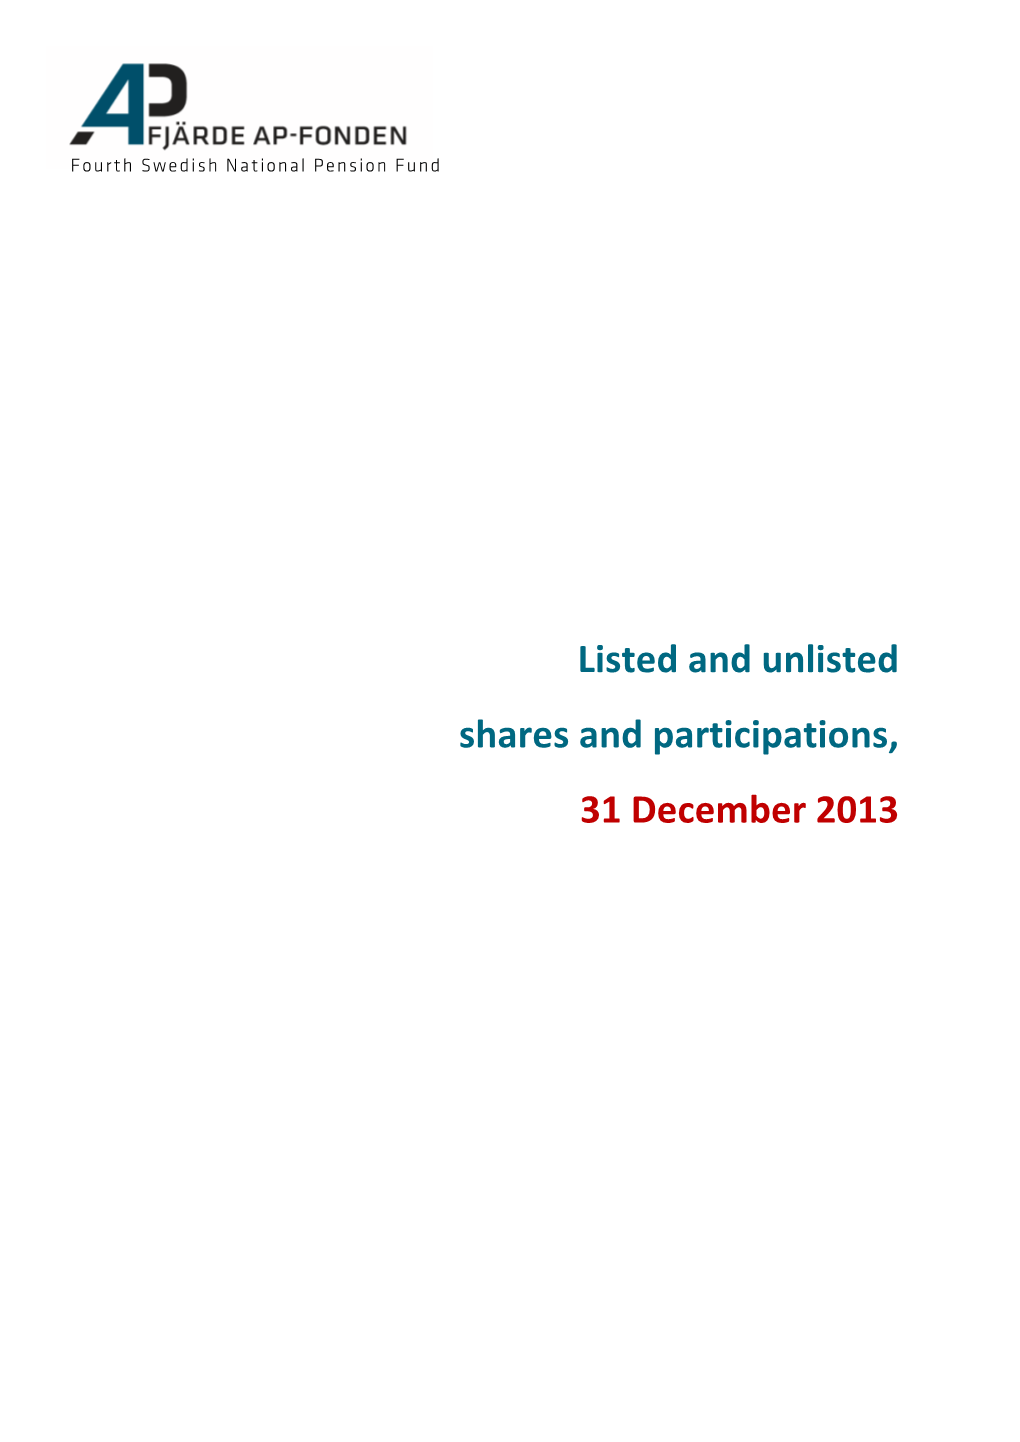 Listed and Unlisted Shares and Participations, 31 December 2013